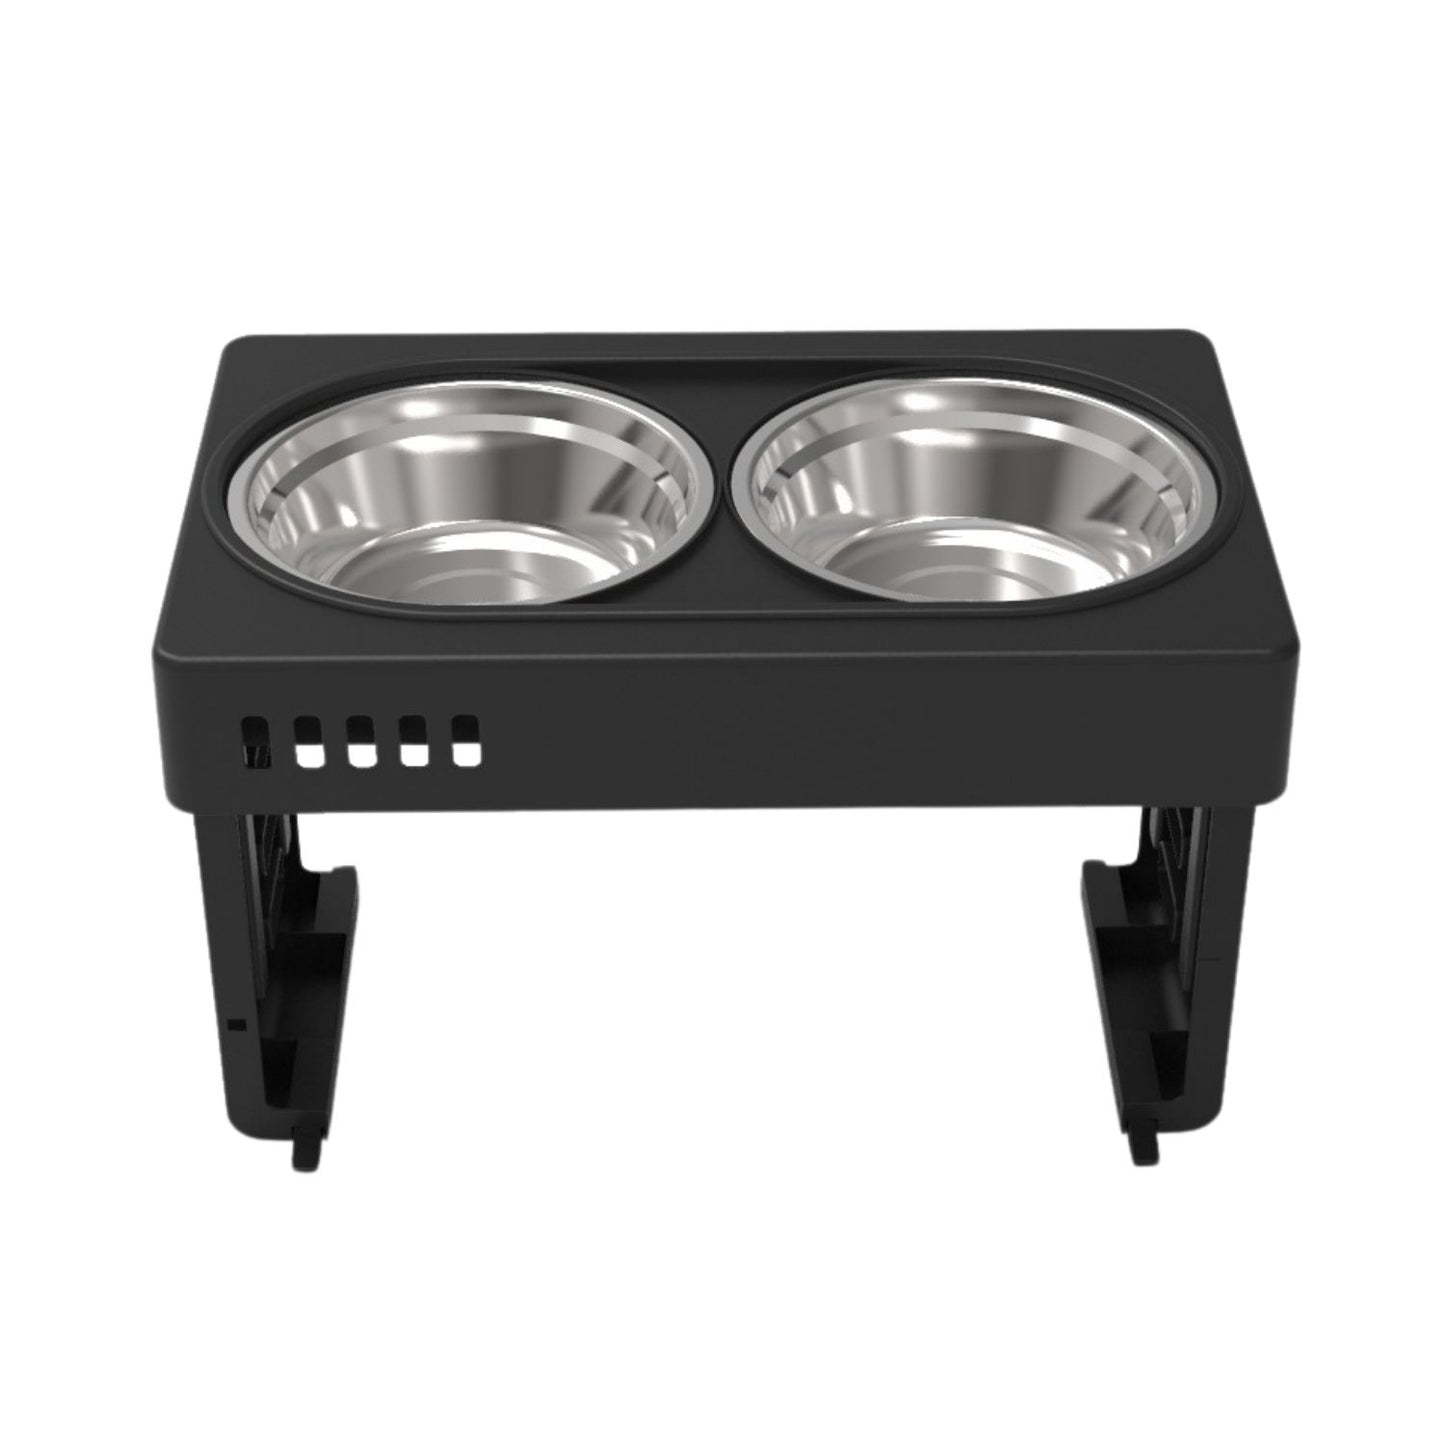 FLOOFI Double Bowl With Elevated Stand Black